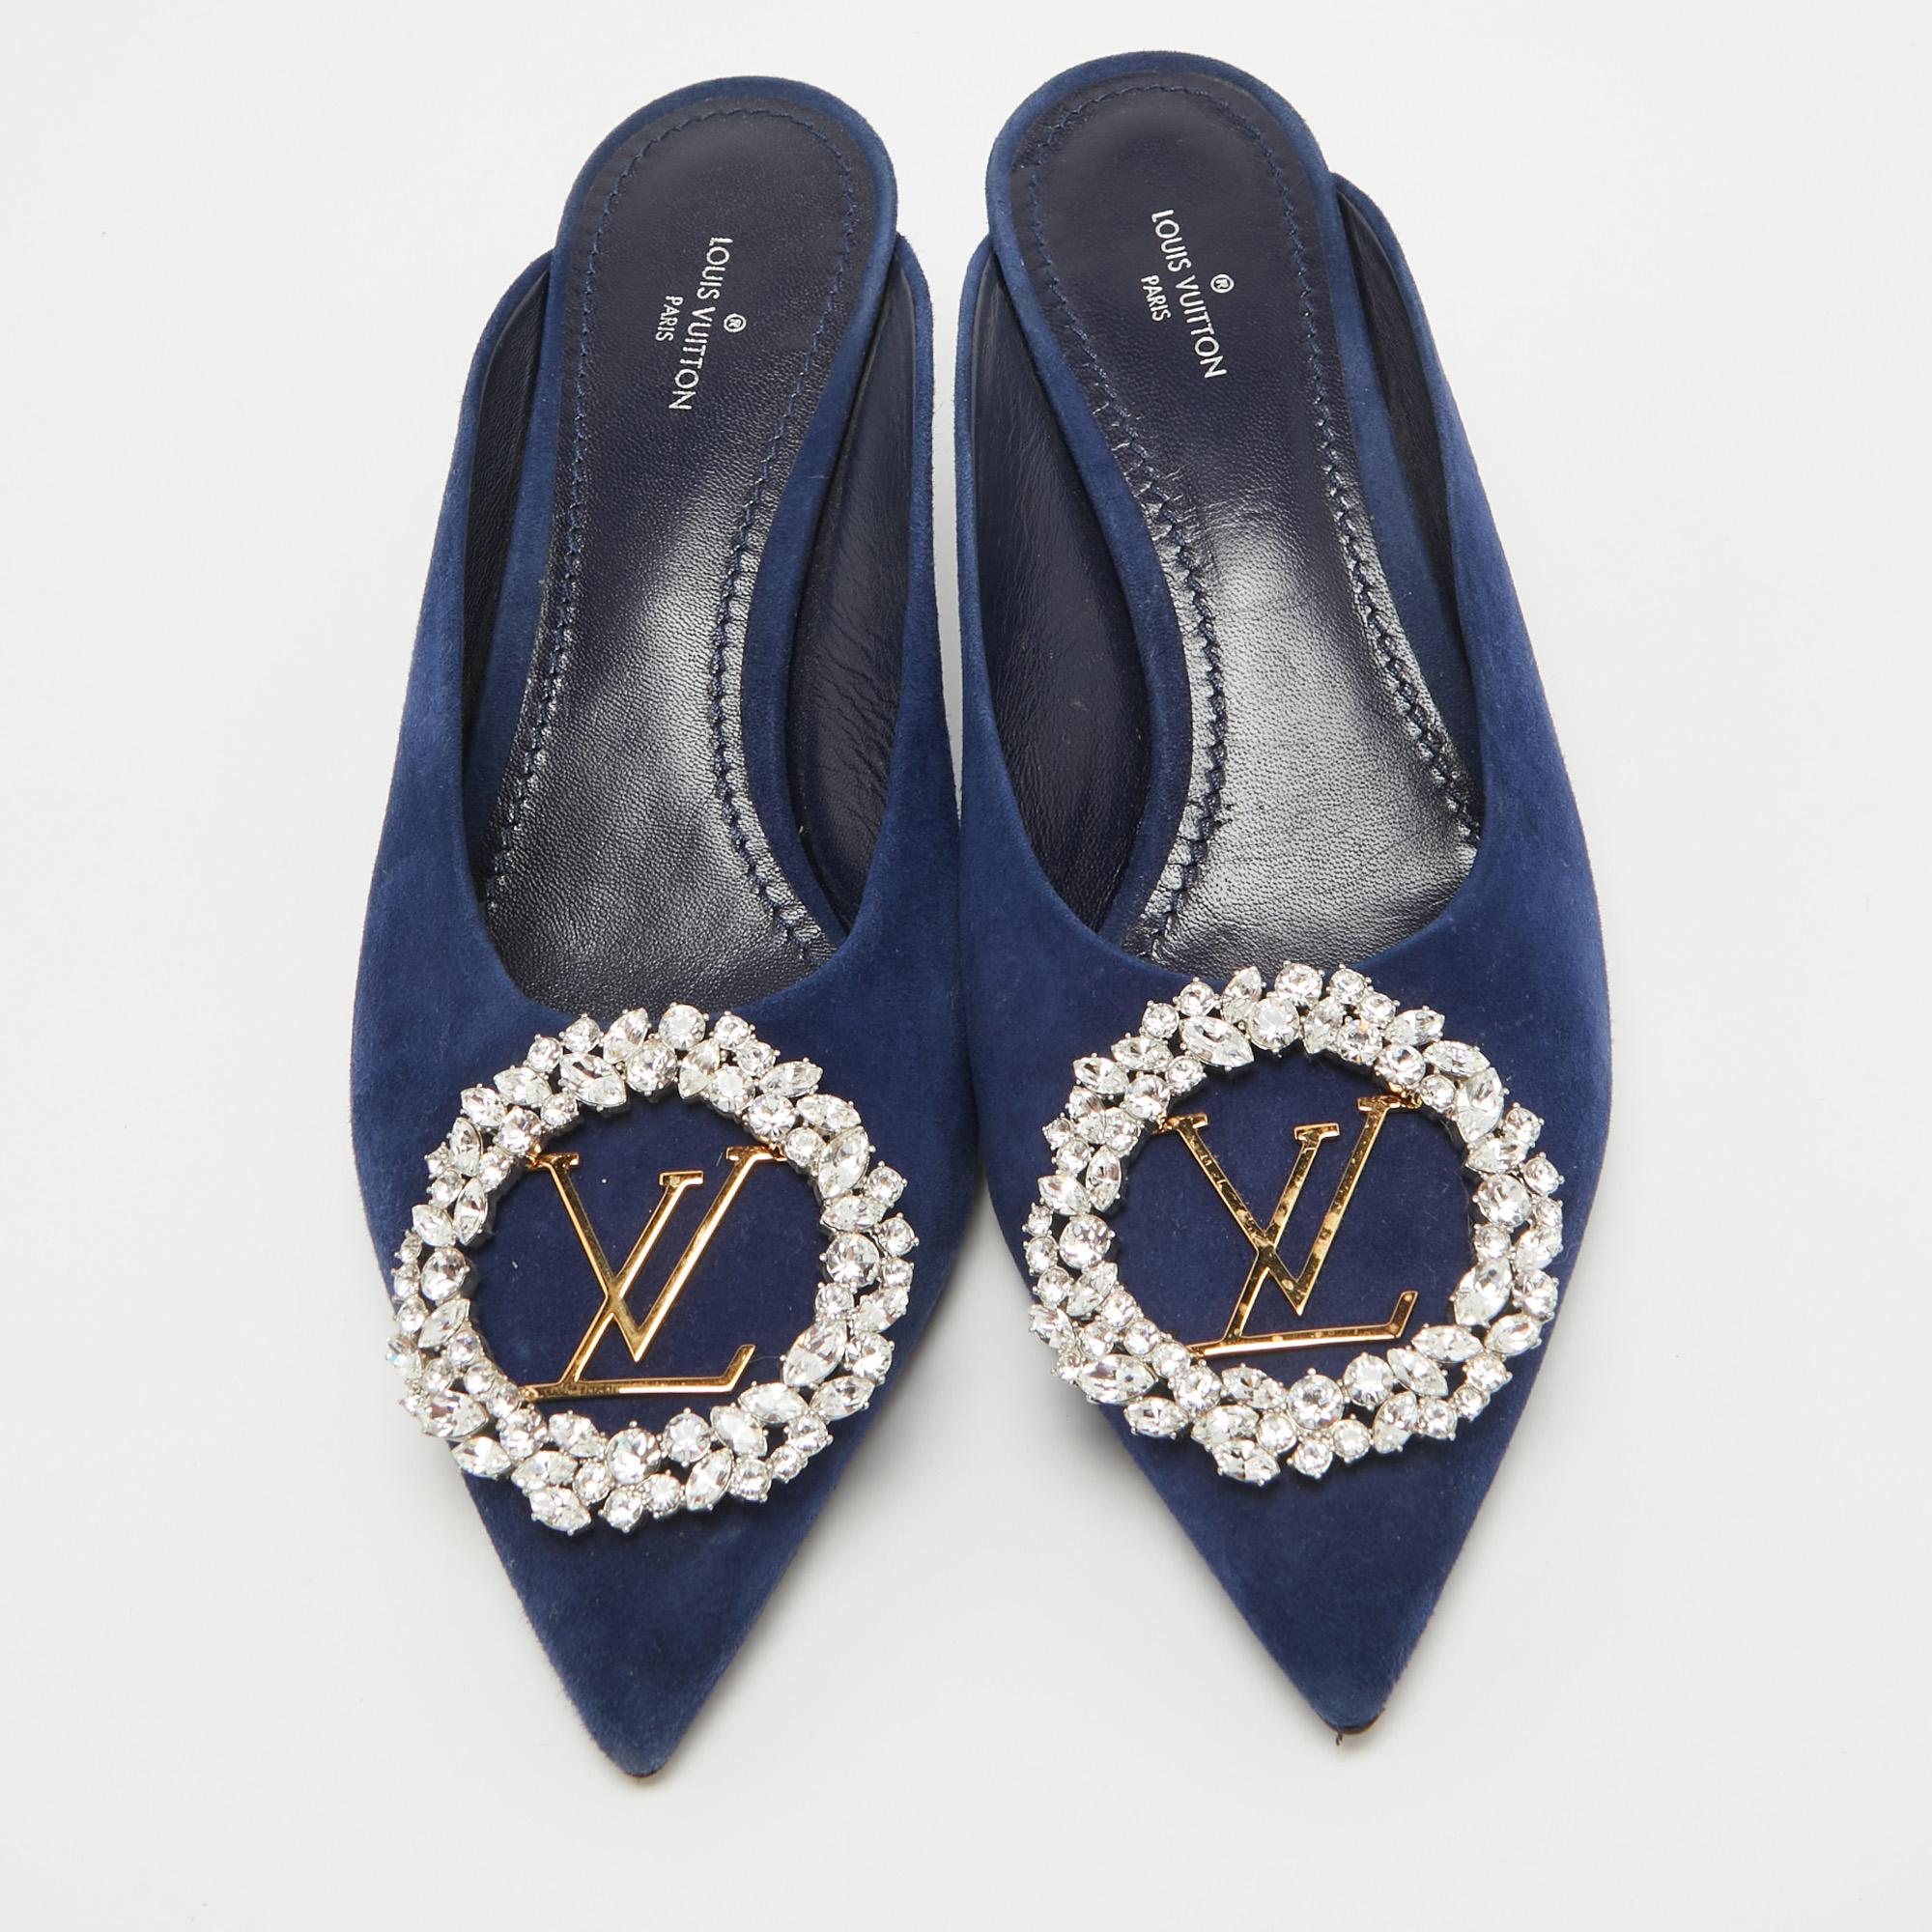 Louis Vuitton Navy Blue Suede Crystal Embellished Madeleine Mules Size 37.5 In Good Condition For Sale In Dubai, Al Qouz 2